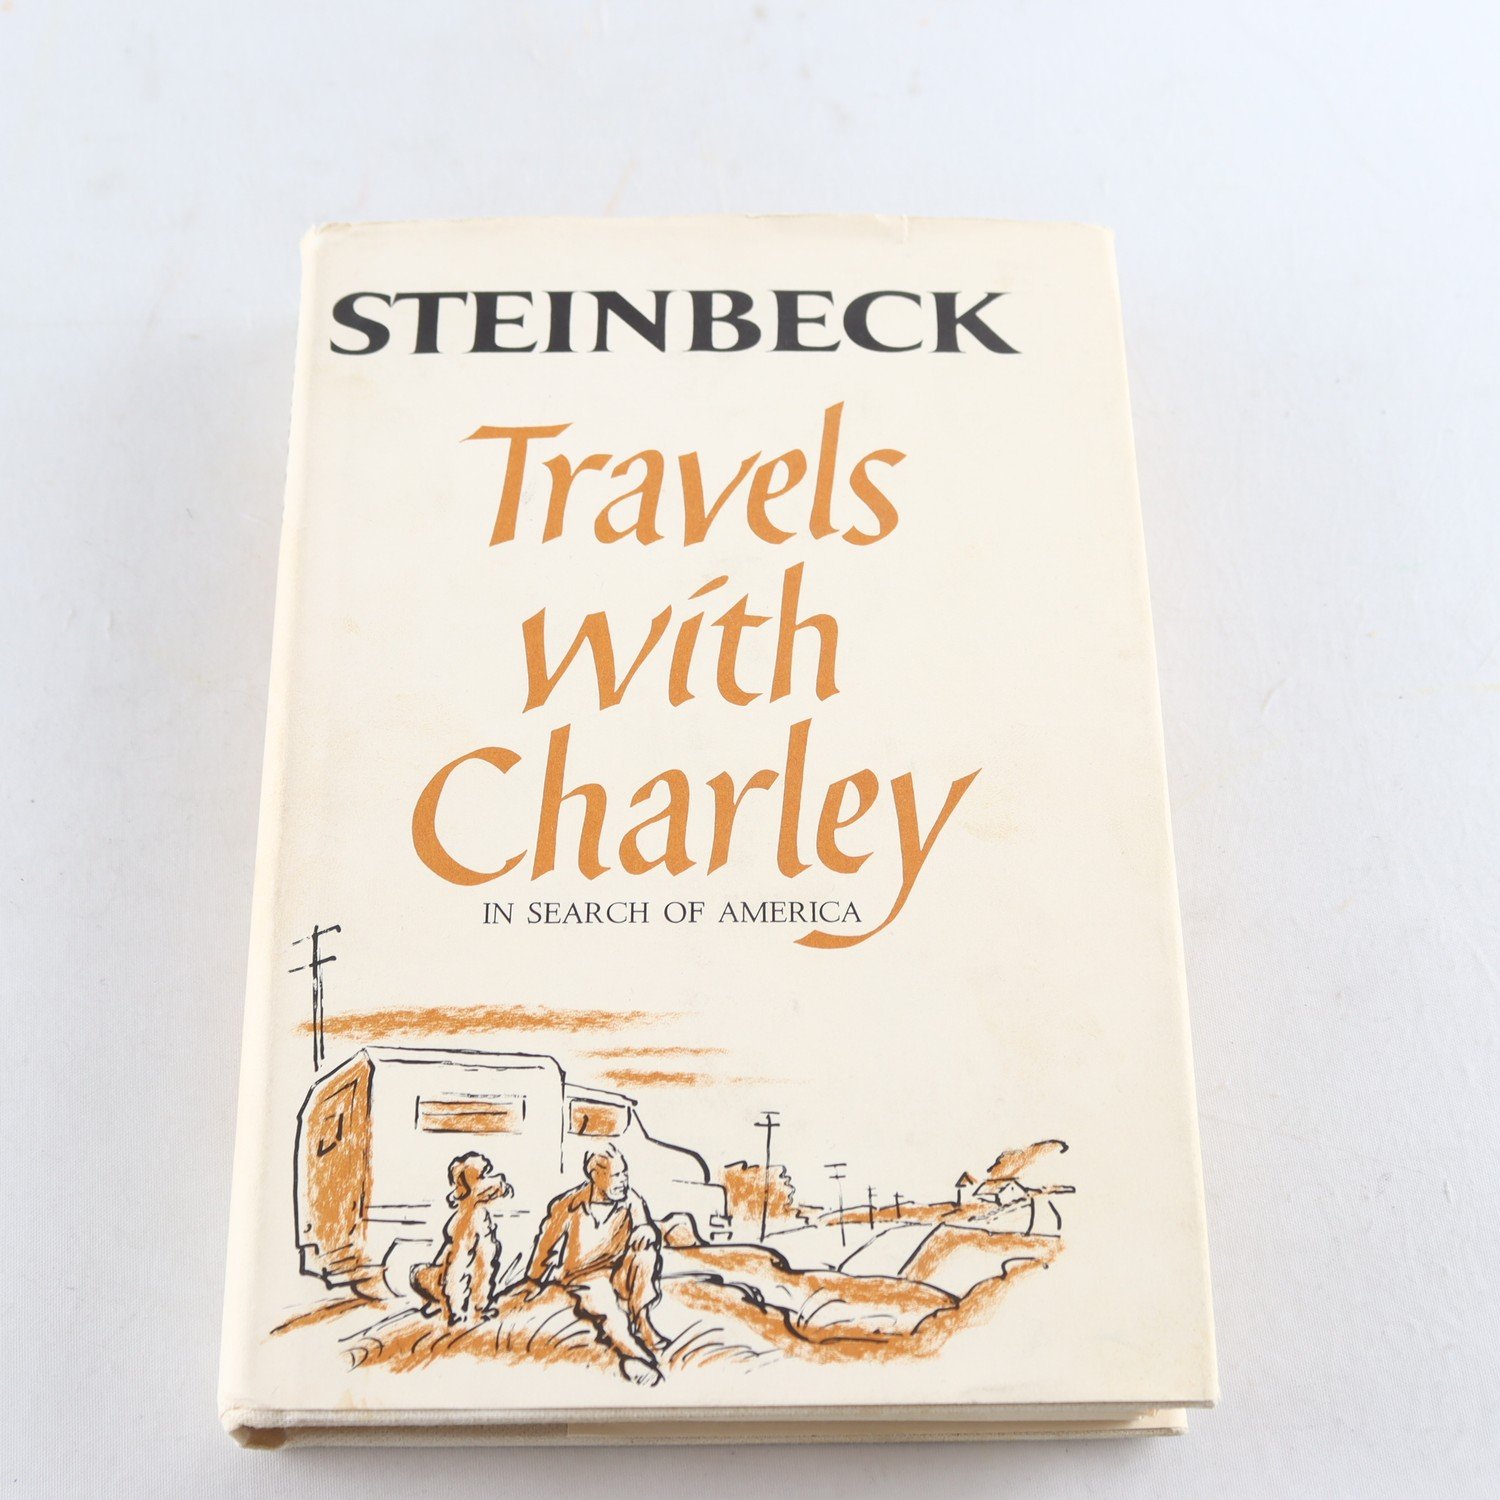 John Steinbeck, Travels With Charley (First edition, 1962)